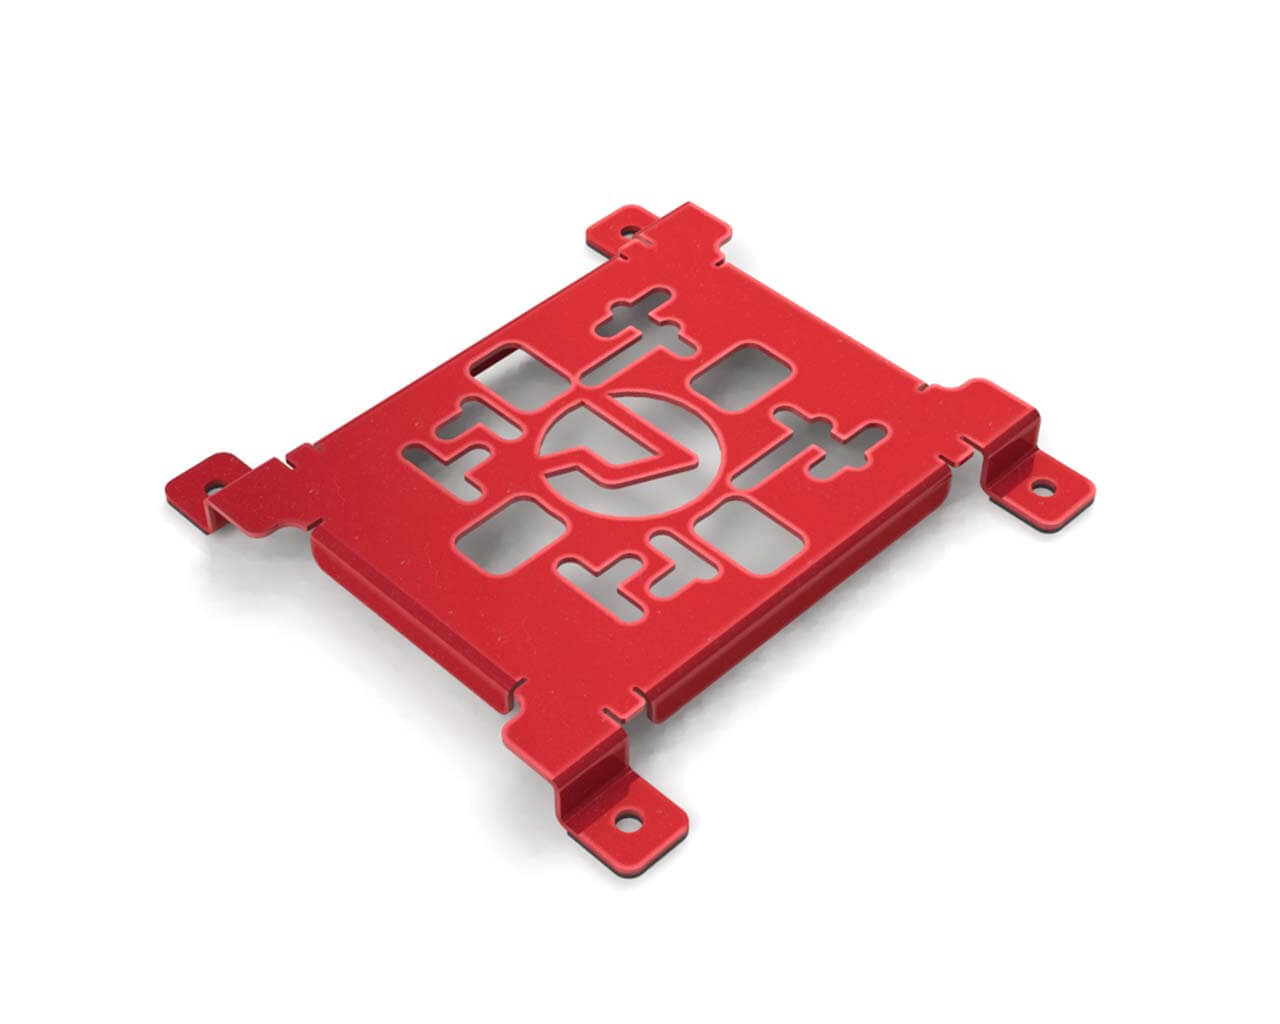 PrimoChill SX Spider Mount Bracket - 120mm Series - PrimoChill - KEEPING IT COOL Candy Red